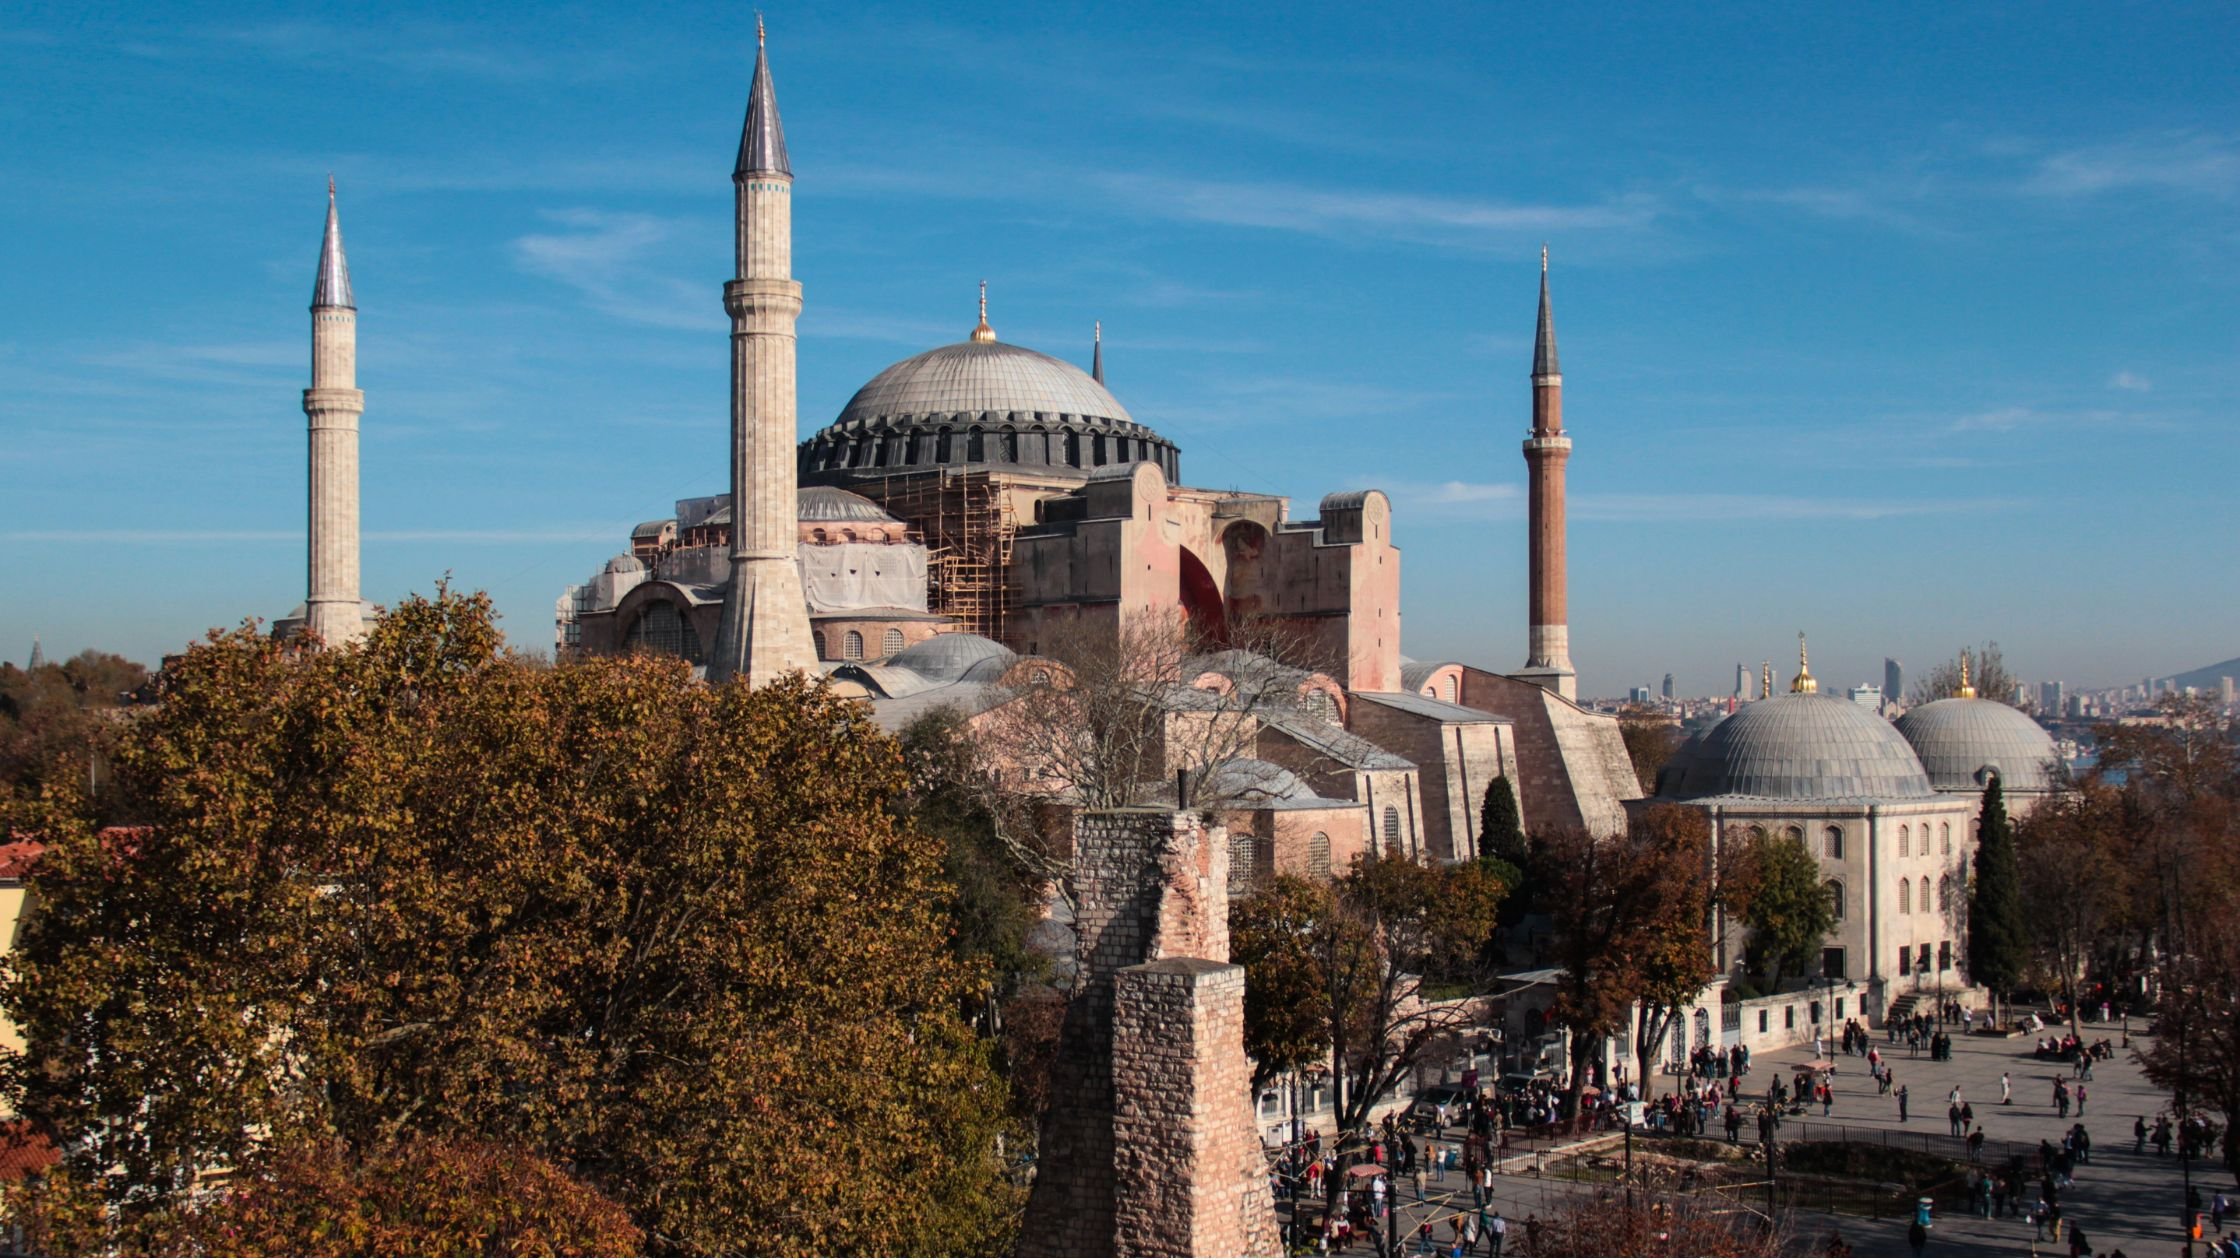 Hagia Sophia is an imposing building built between 532 and 537 by the Byzantine Empire to be the cathedral of Constantinople. - These purchases in properties often come with attractive technology features, catering to the modern lifestyle sought by many investors.